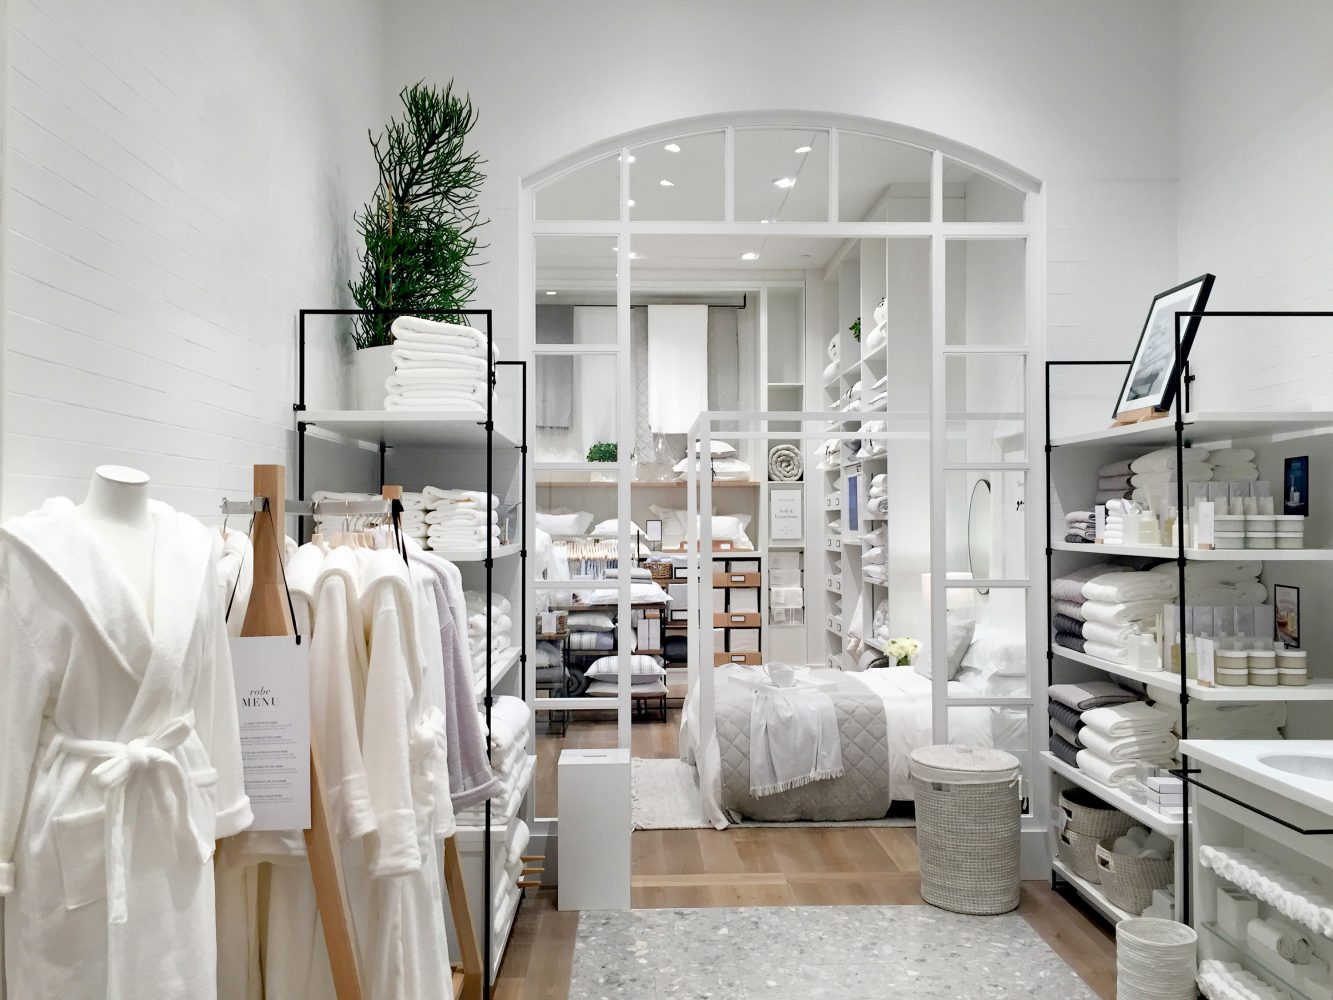 Product display, The White Company New York, Flagship Design by Household.